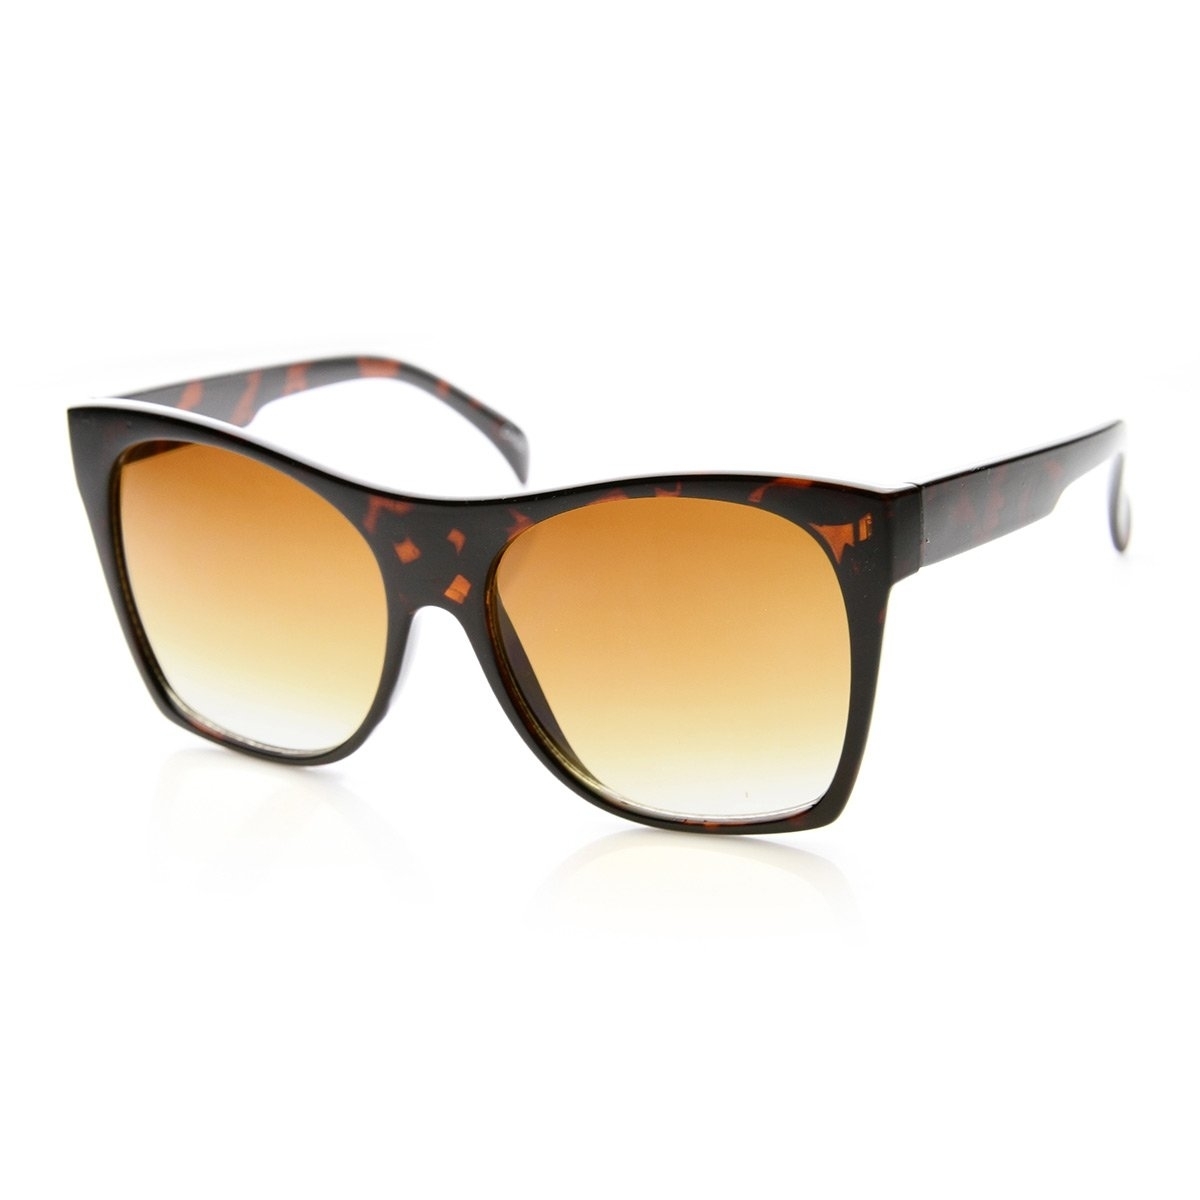 Womens Oversized High Temple Square Frame Cat Eye Sunglasses - Peach-Grey Amber